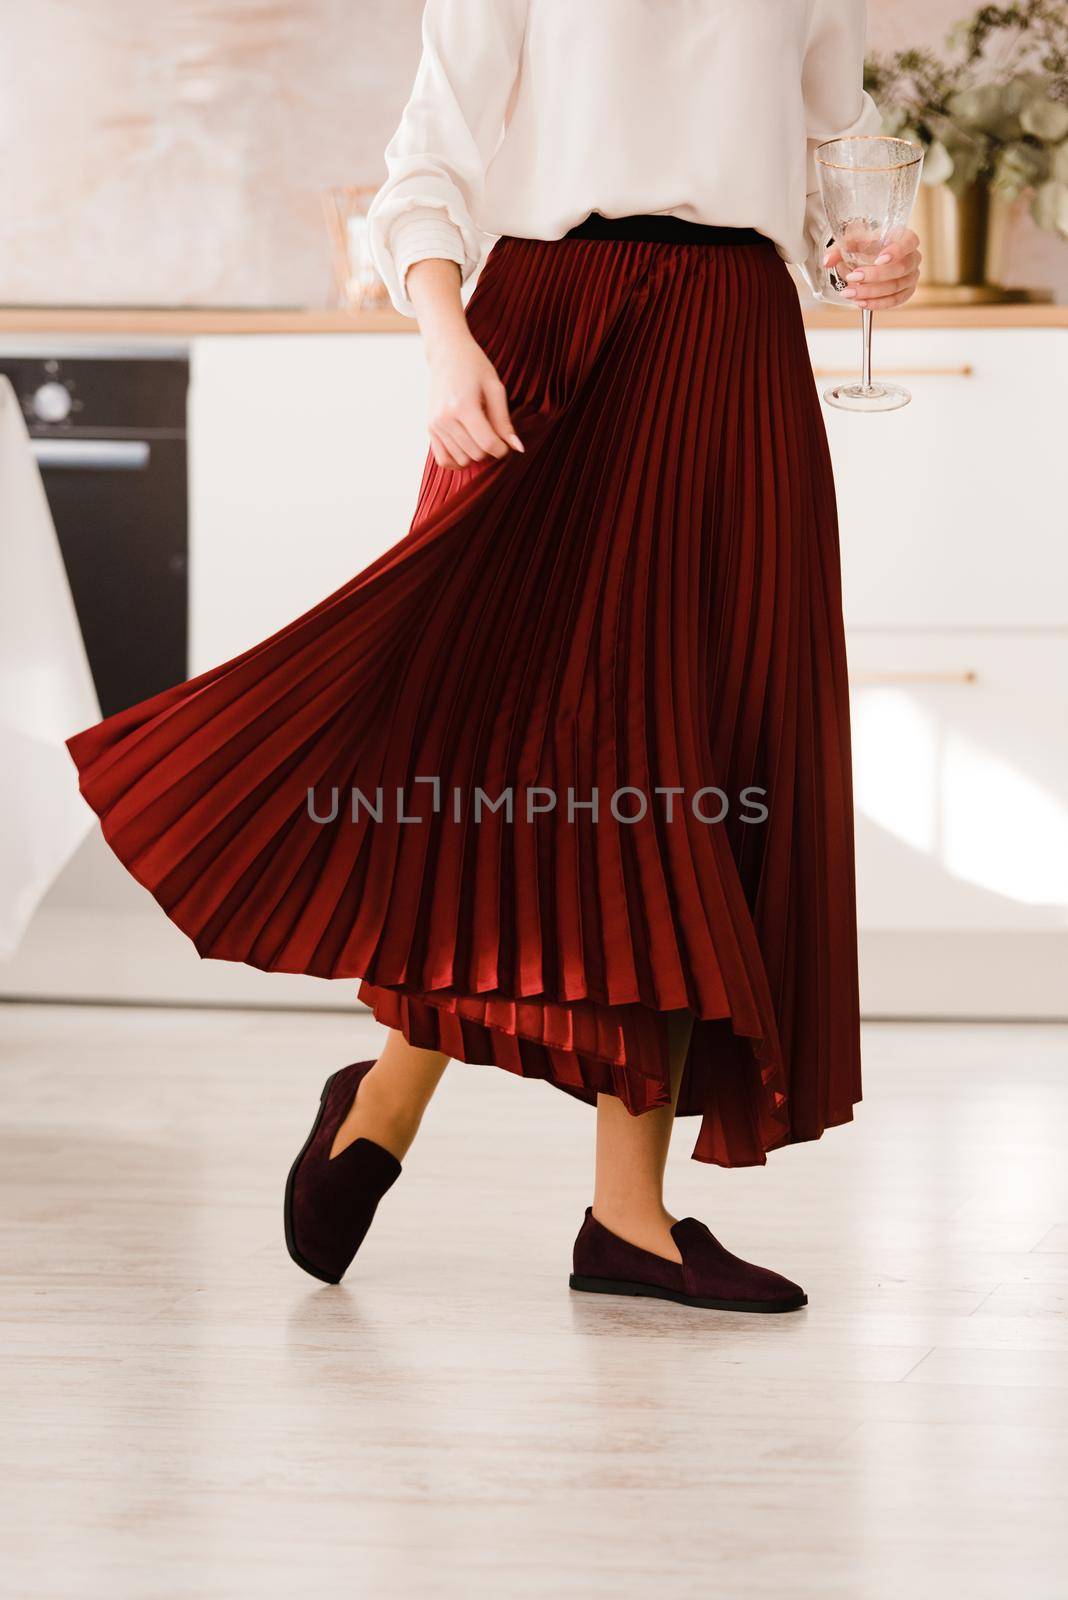 Photo of women's legs in a stylish suede burgundy loafers. Woman wearing red skirt. by Ashtray25